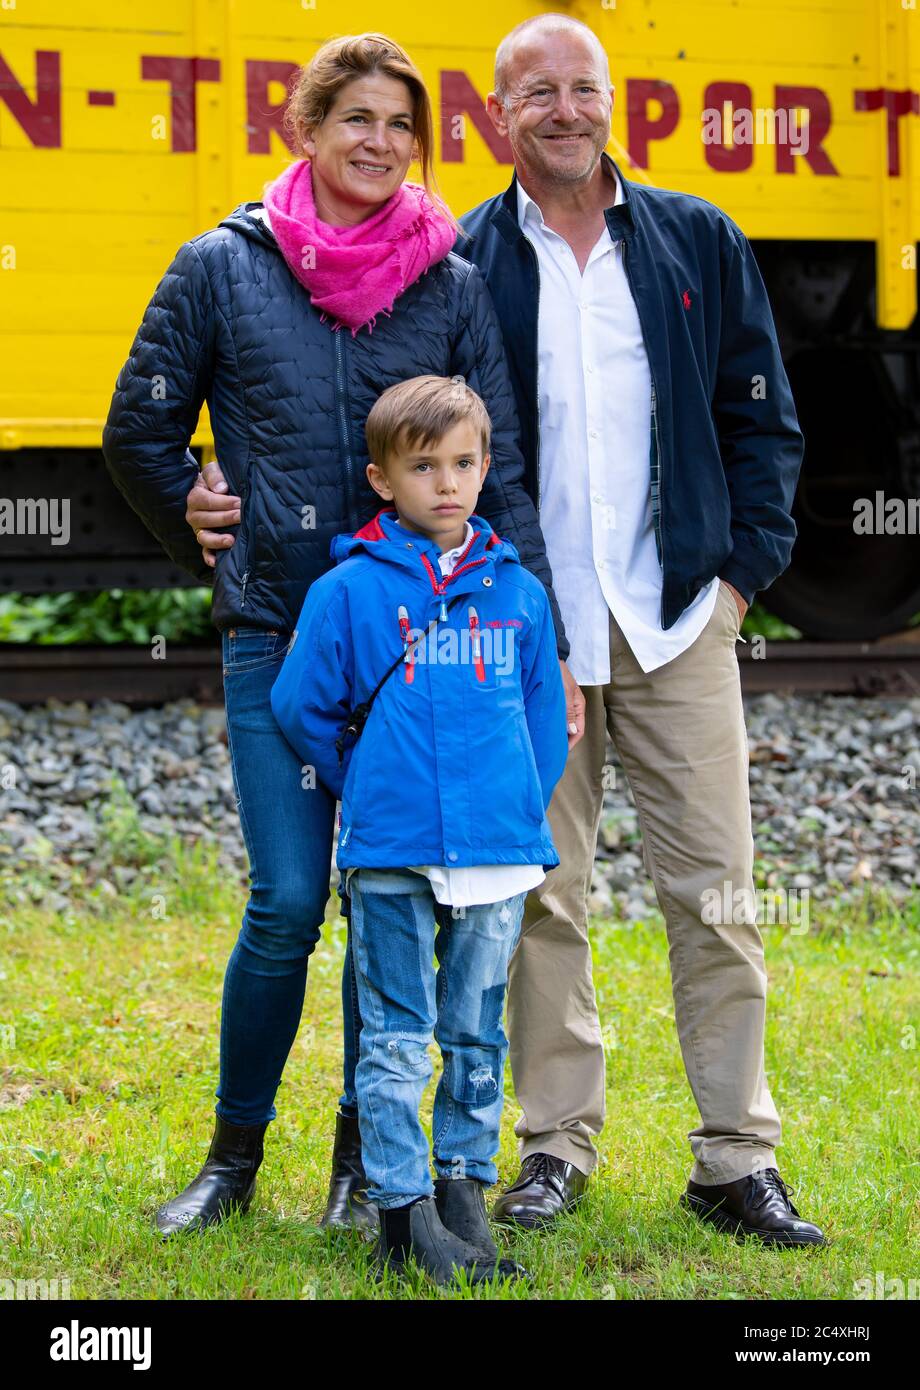 29 June 2020, Bavaria, Weßling: Heino Ferch, actor, with his wife Marie-Jeanette and son Gustav, recorded at a press event at Circus Krone Farm. Photo: Sven Hoppe/dpa Stock Photo